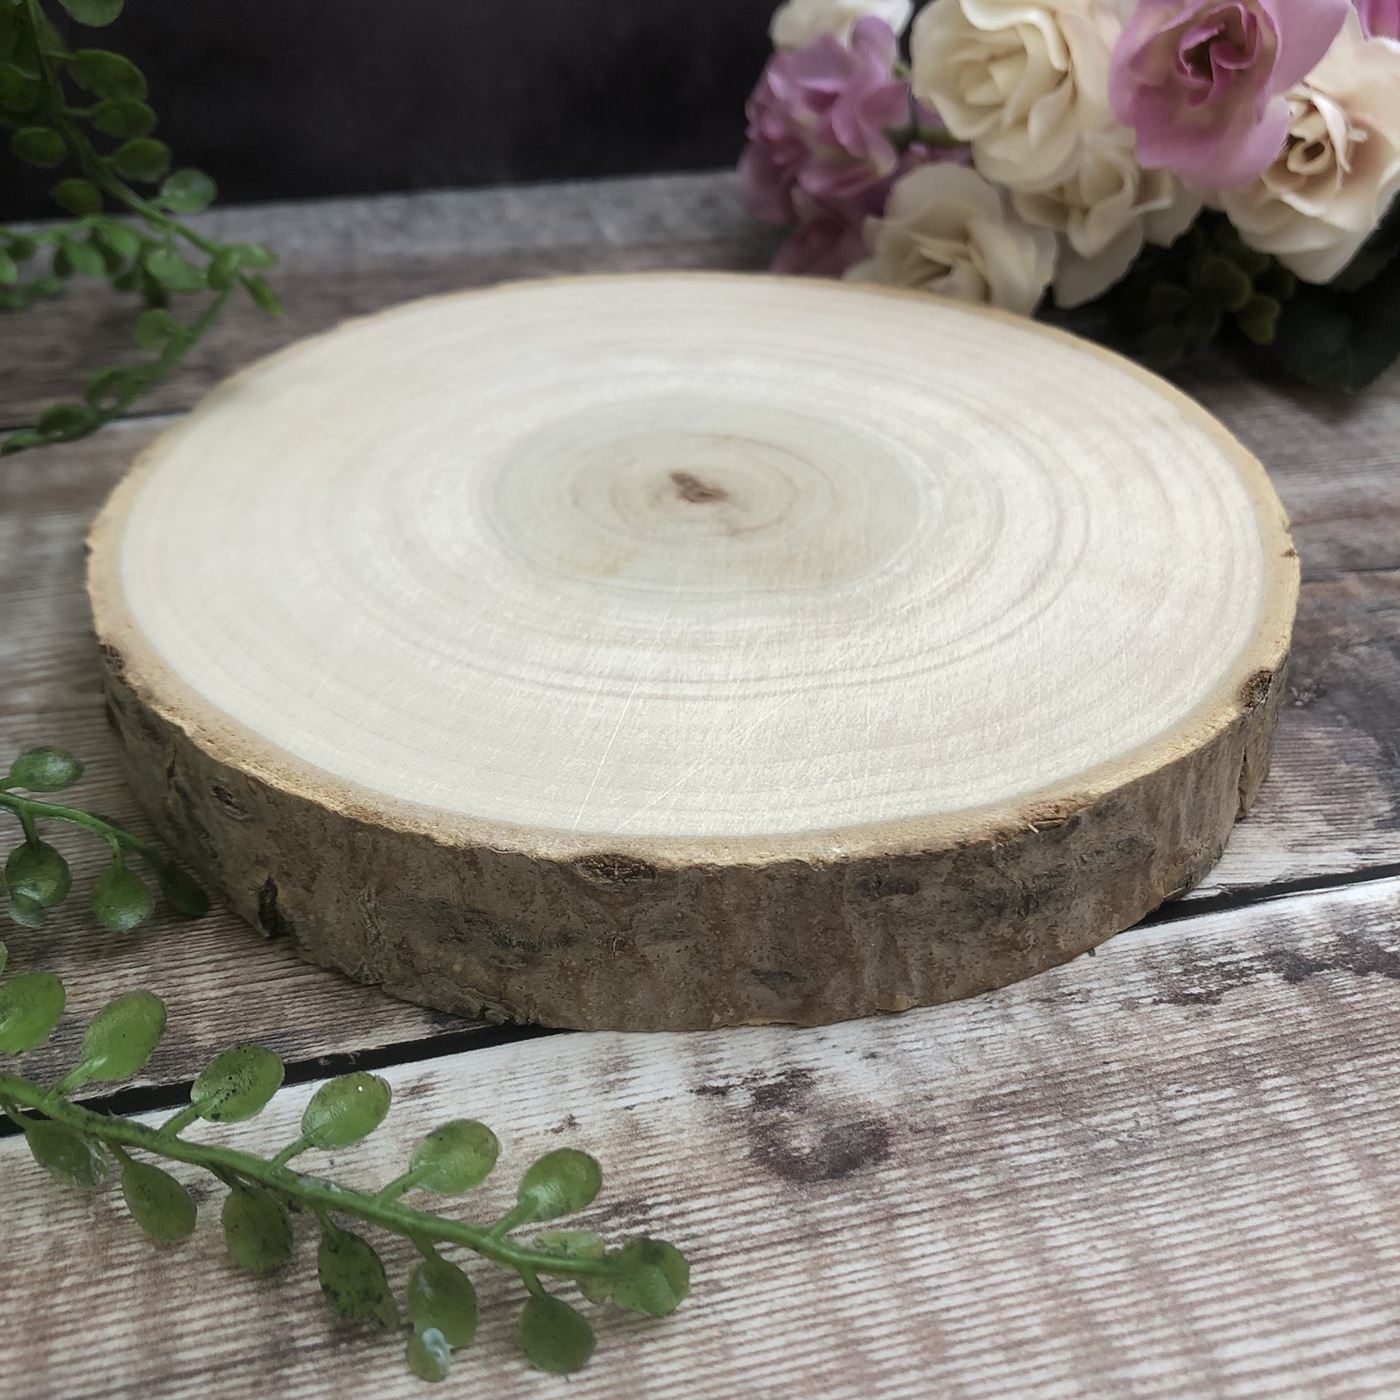 Personalised Log Slice Tealight Candle Holder - Home Sweet Home